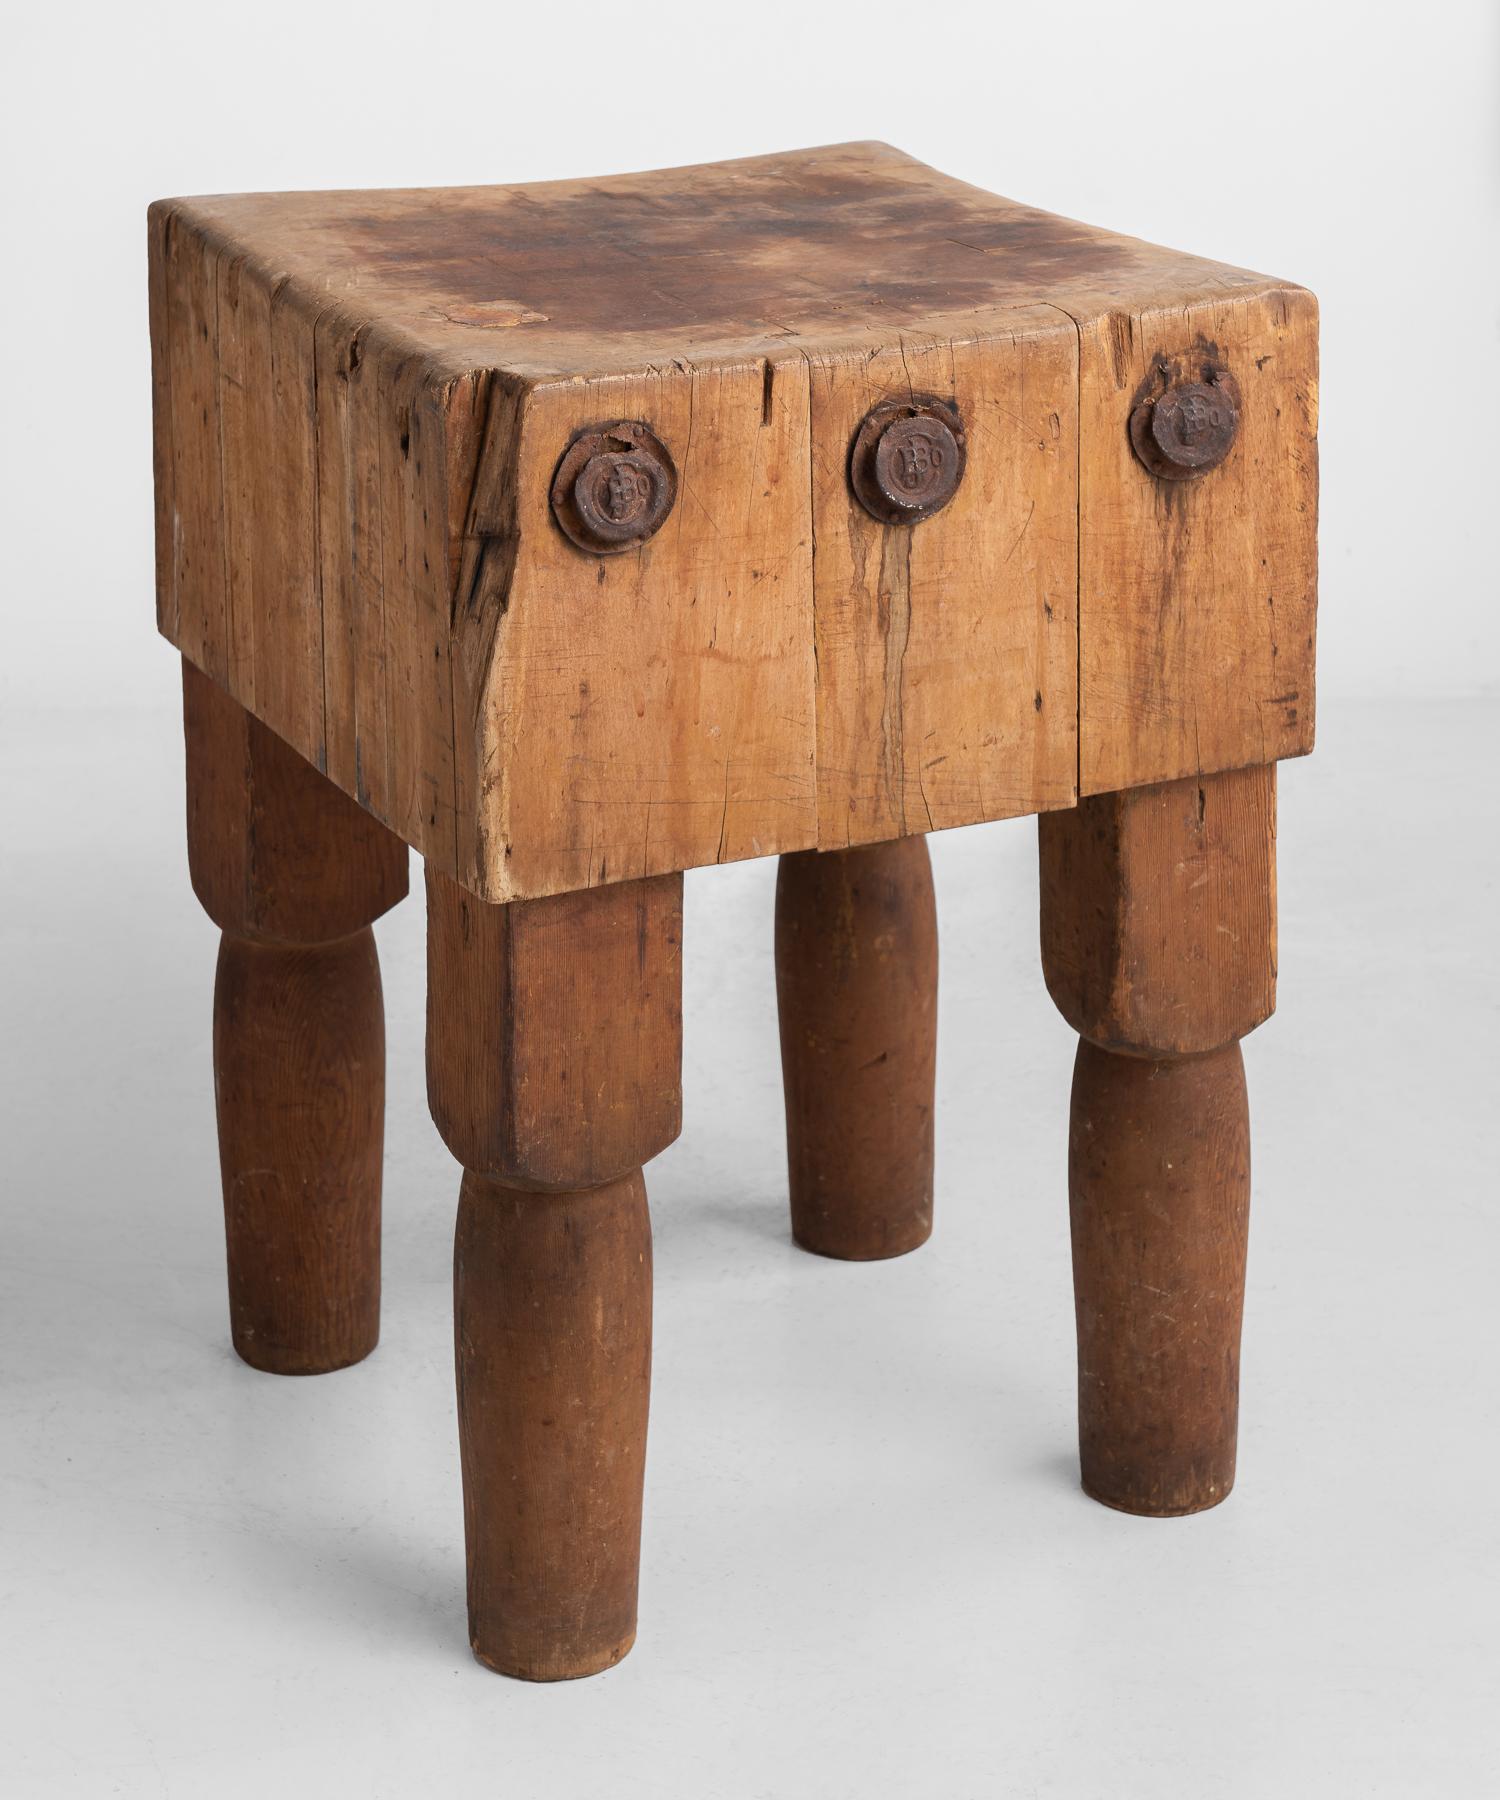 Butcher block table, America, circa 1930.

Simple form, with original patina and large metal rivets. Maple top with thick pine legs.

Measures: 20.5